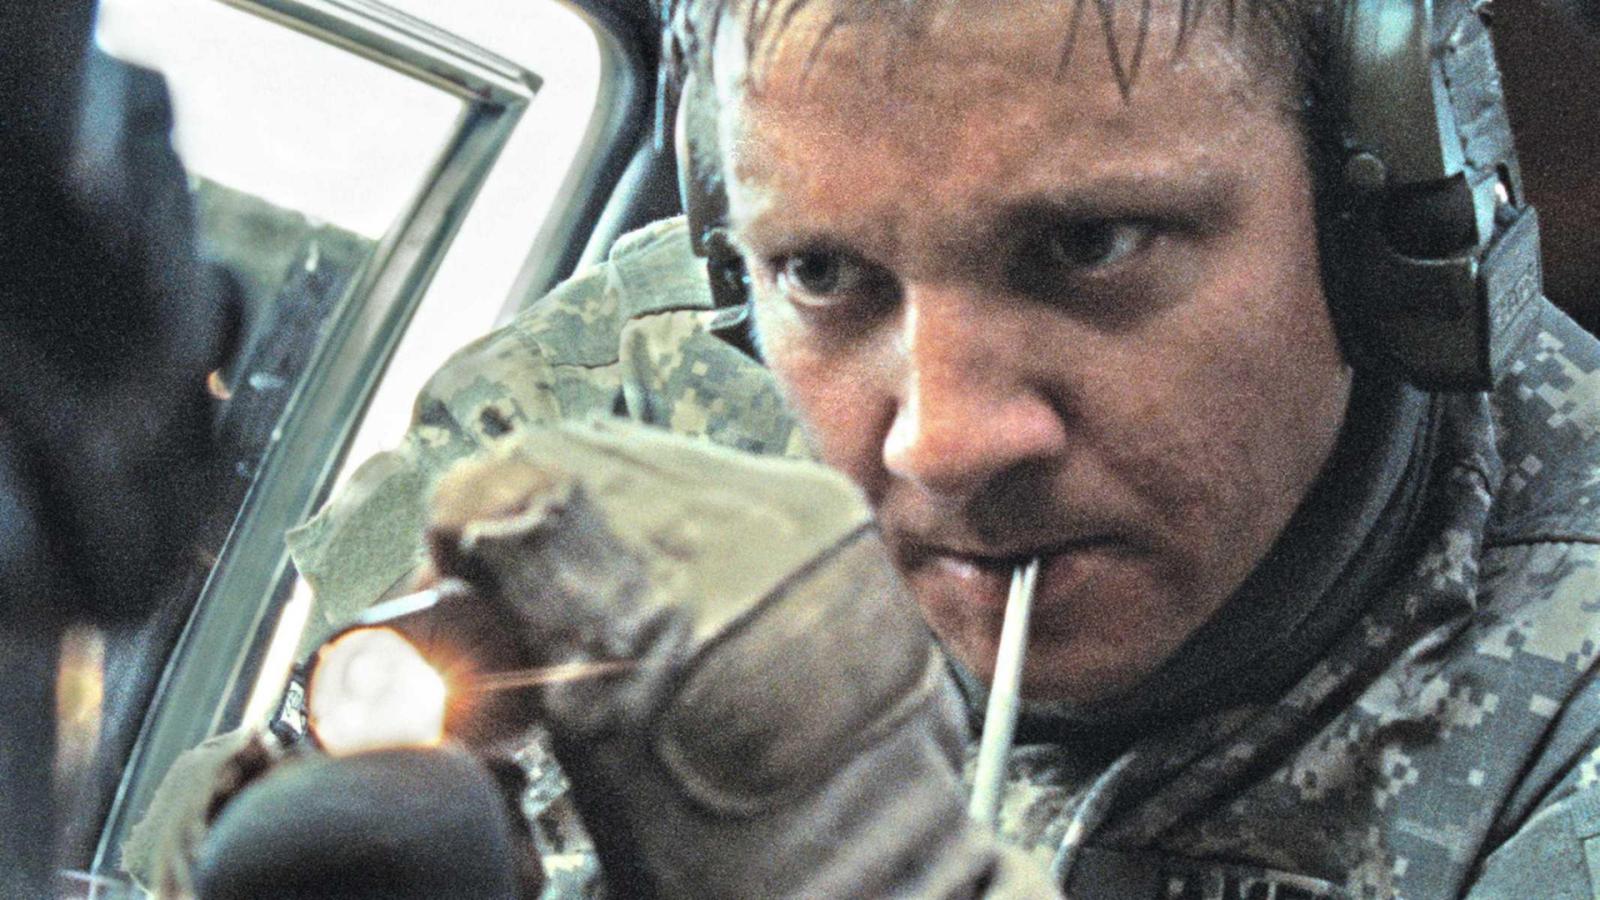 15 War Films with Storylines as Powerful as Saving Private Ryan - image 6